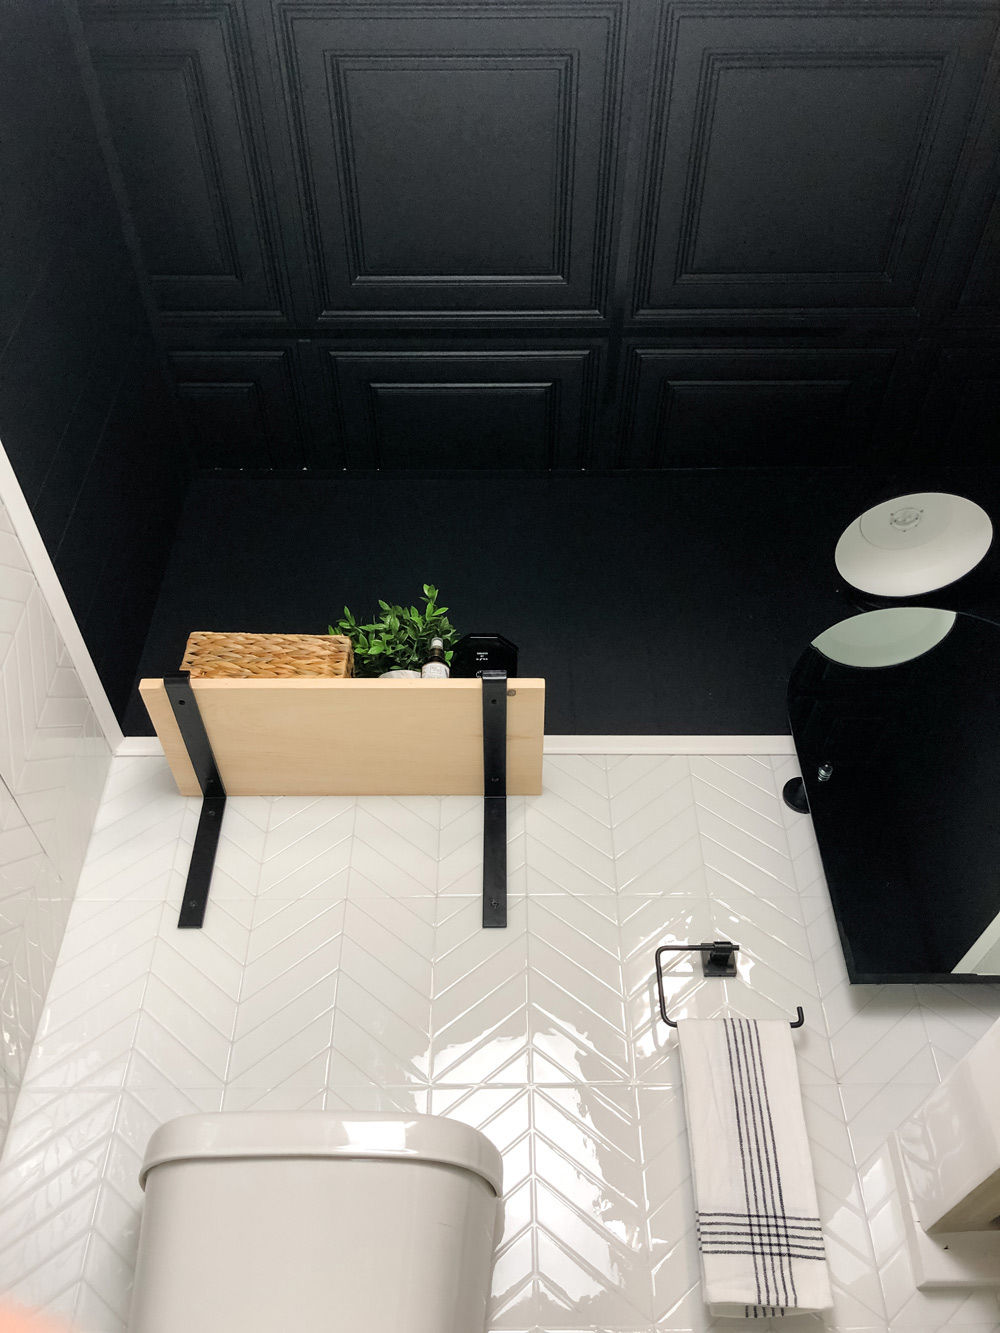 Black decorative ceiling tiles featured above wooden shelf and toilet.